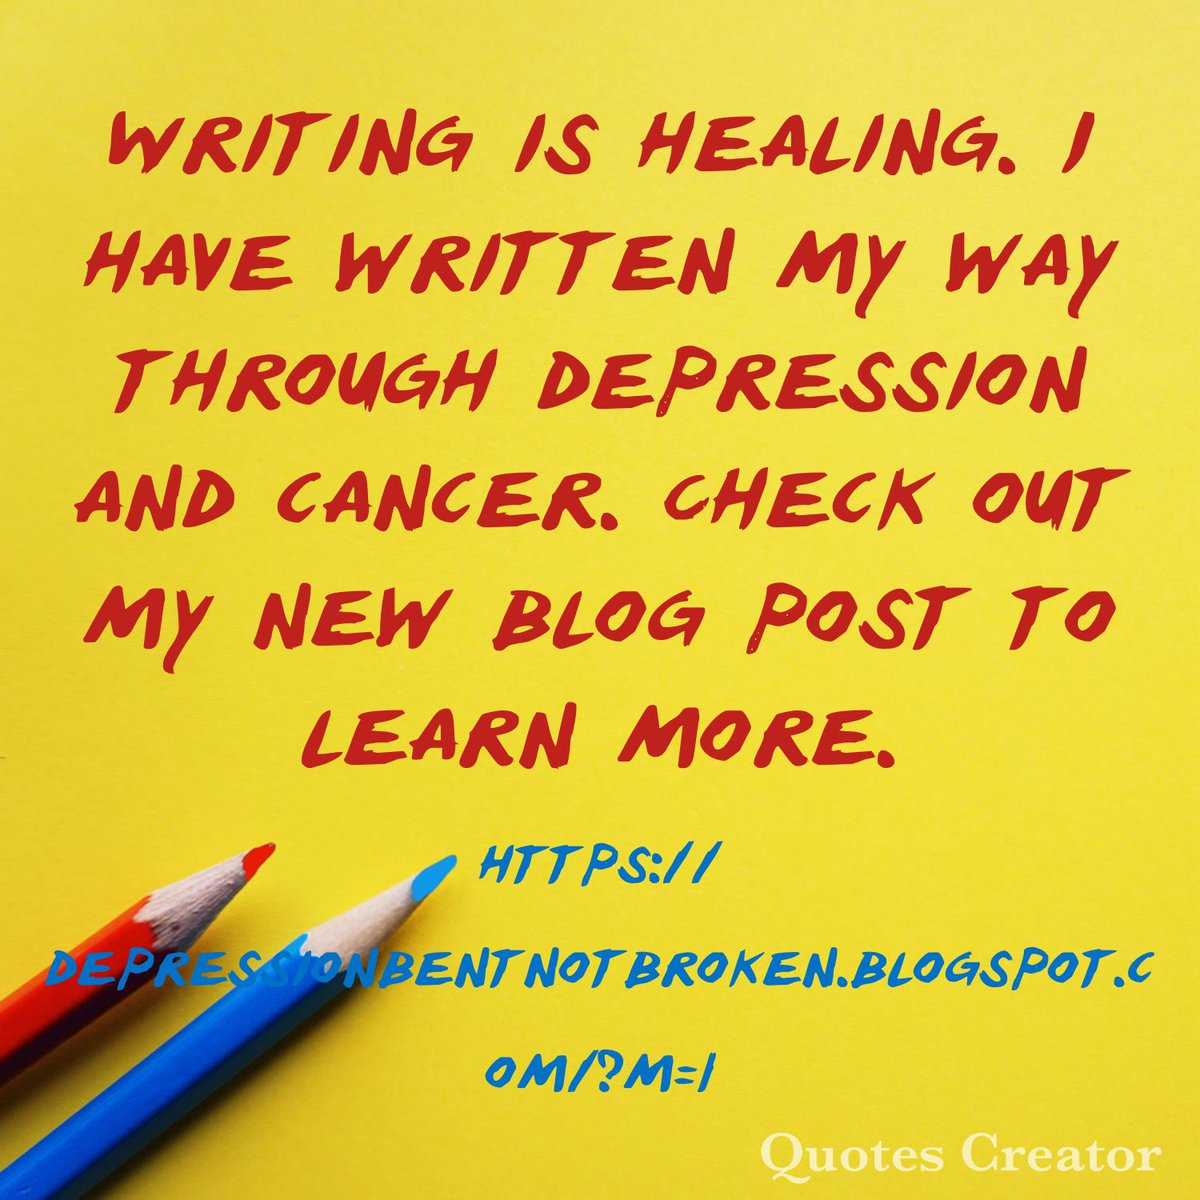 #Writing is healing. My pen has carried my through #depression and #cancer. Read about writing’ healing power in my new blog post. Share with someone who might benefit. 
depressionbentnotbroken.blogspot.com/?m=1
#mentalillness #mentalhealth #anxiety #writingtoheal #psychiatry #journaling